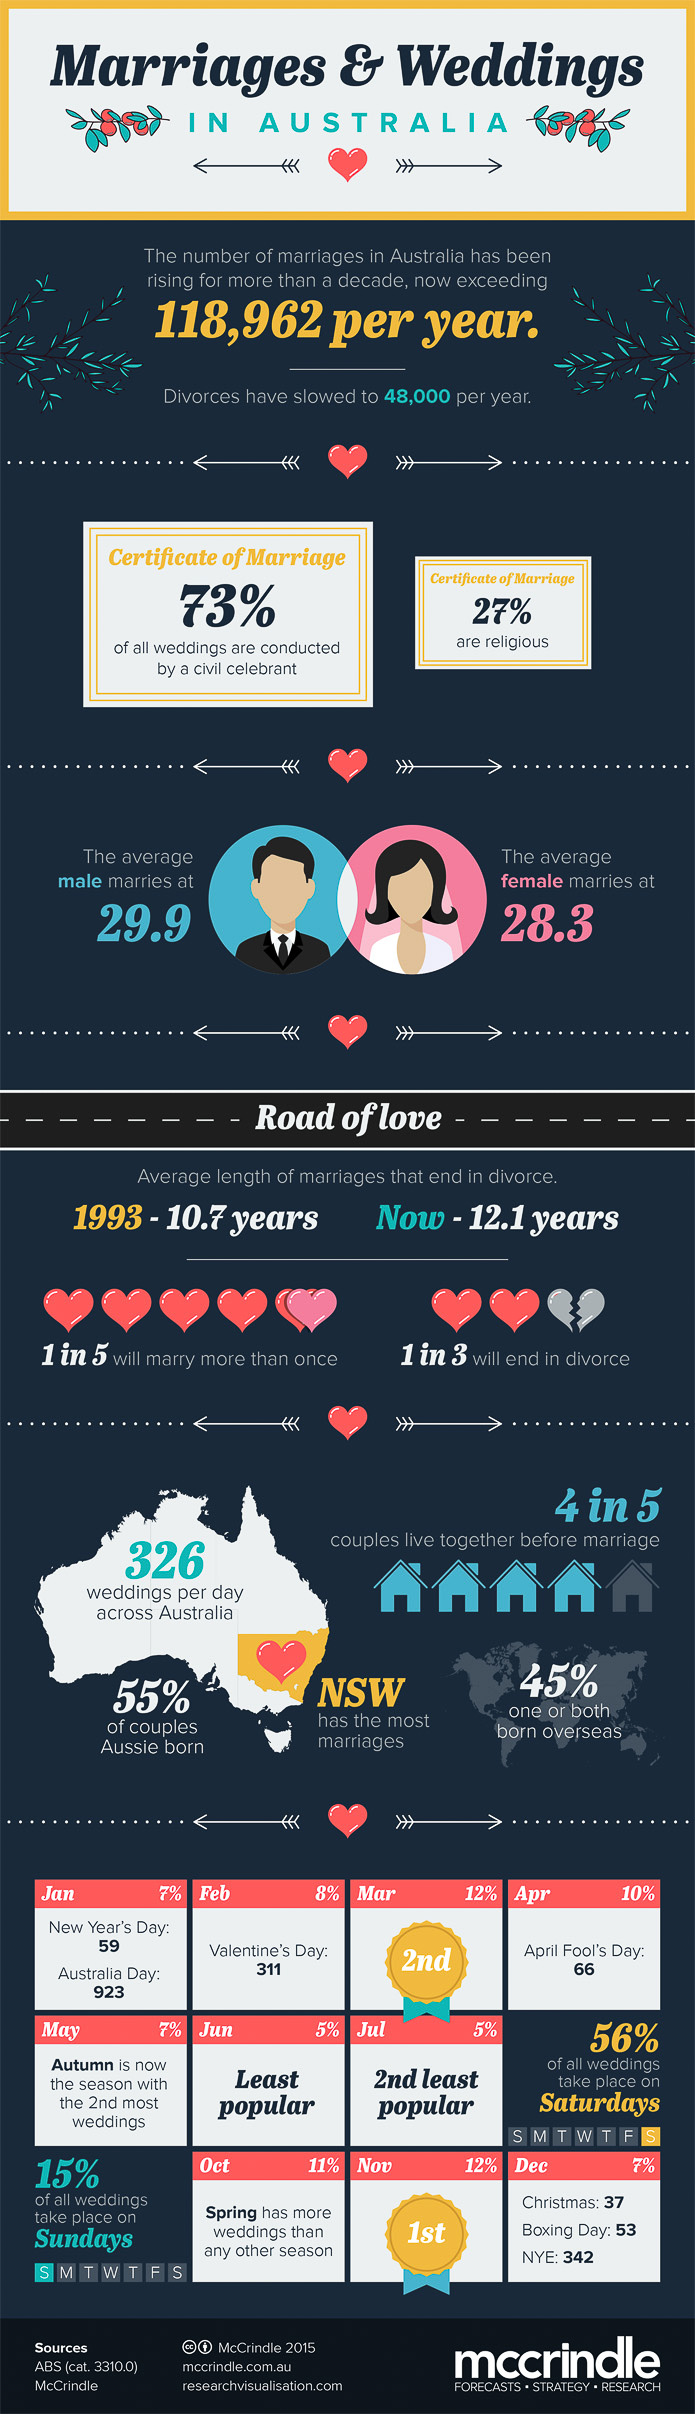 Marriages and Weddings in Australia infographic